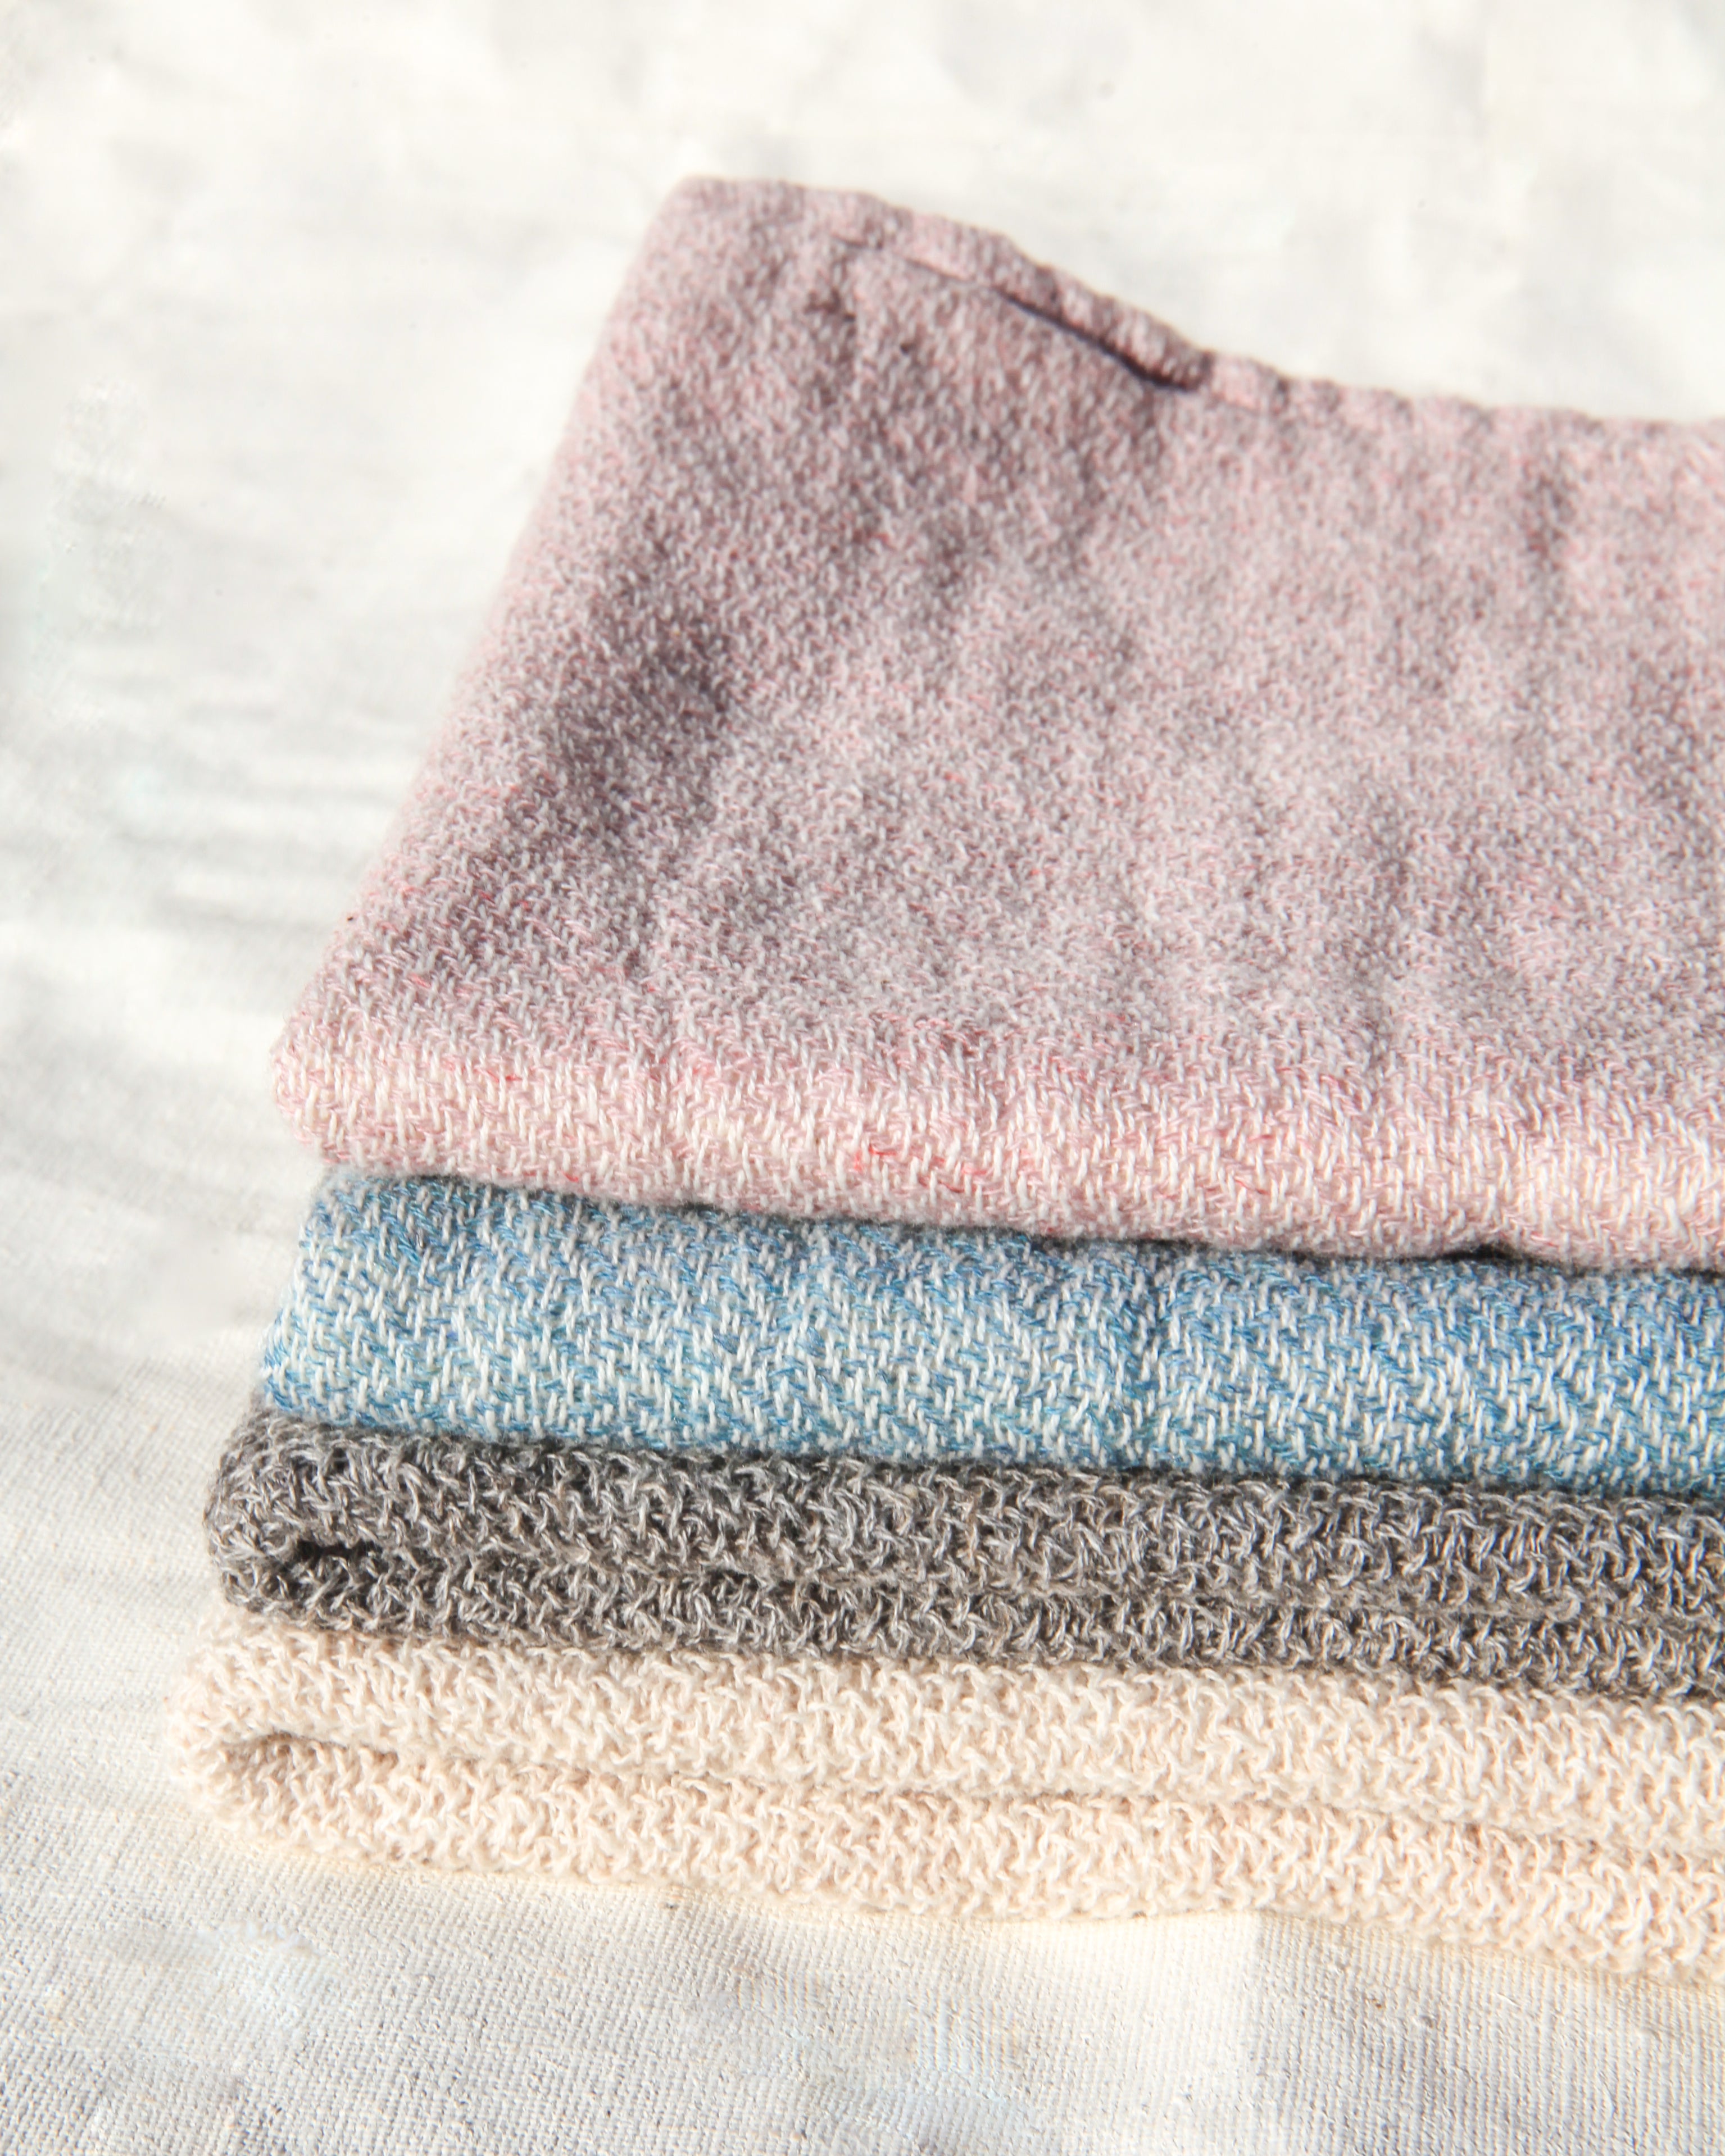 Morihata International Claire Organic Cotton Japanese Bath Towels in 4  Colors on Food52